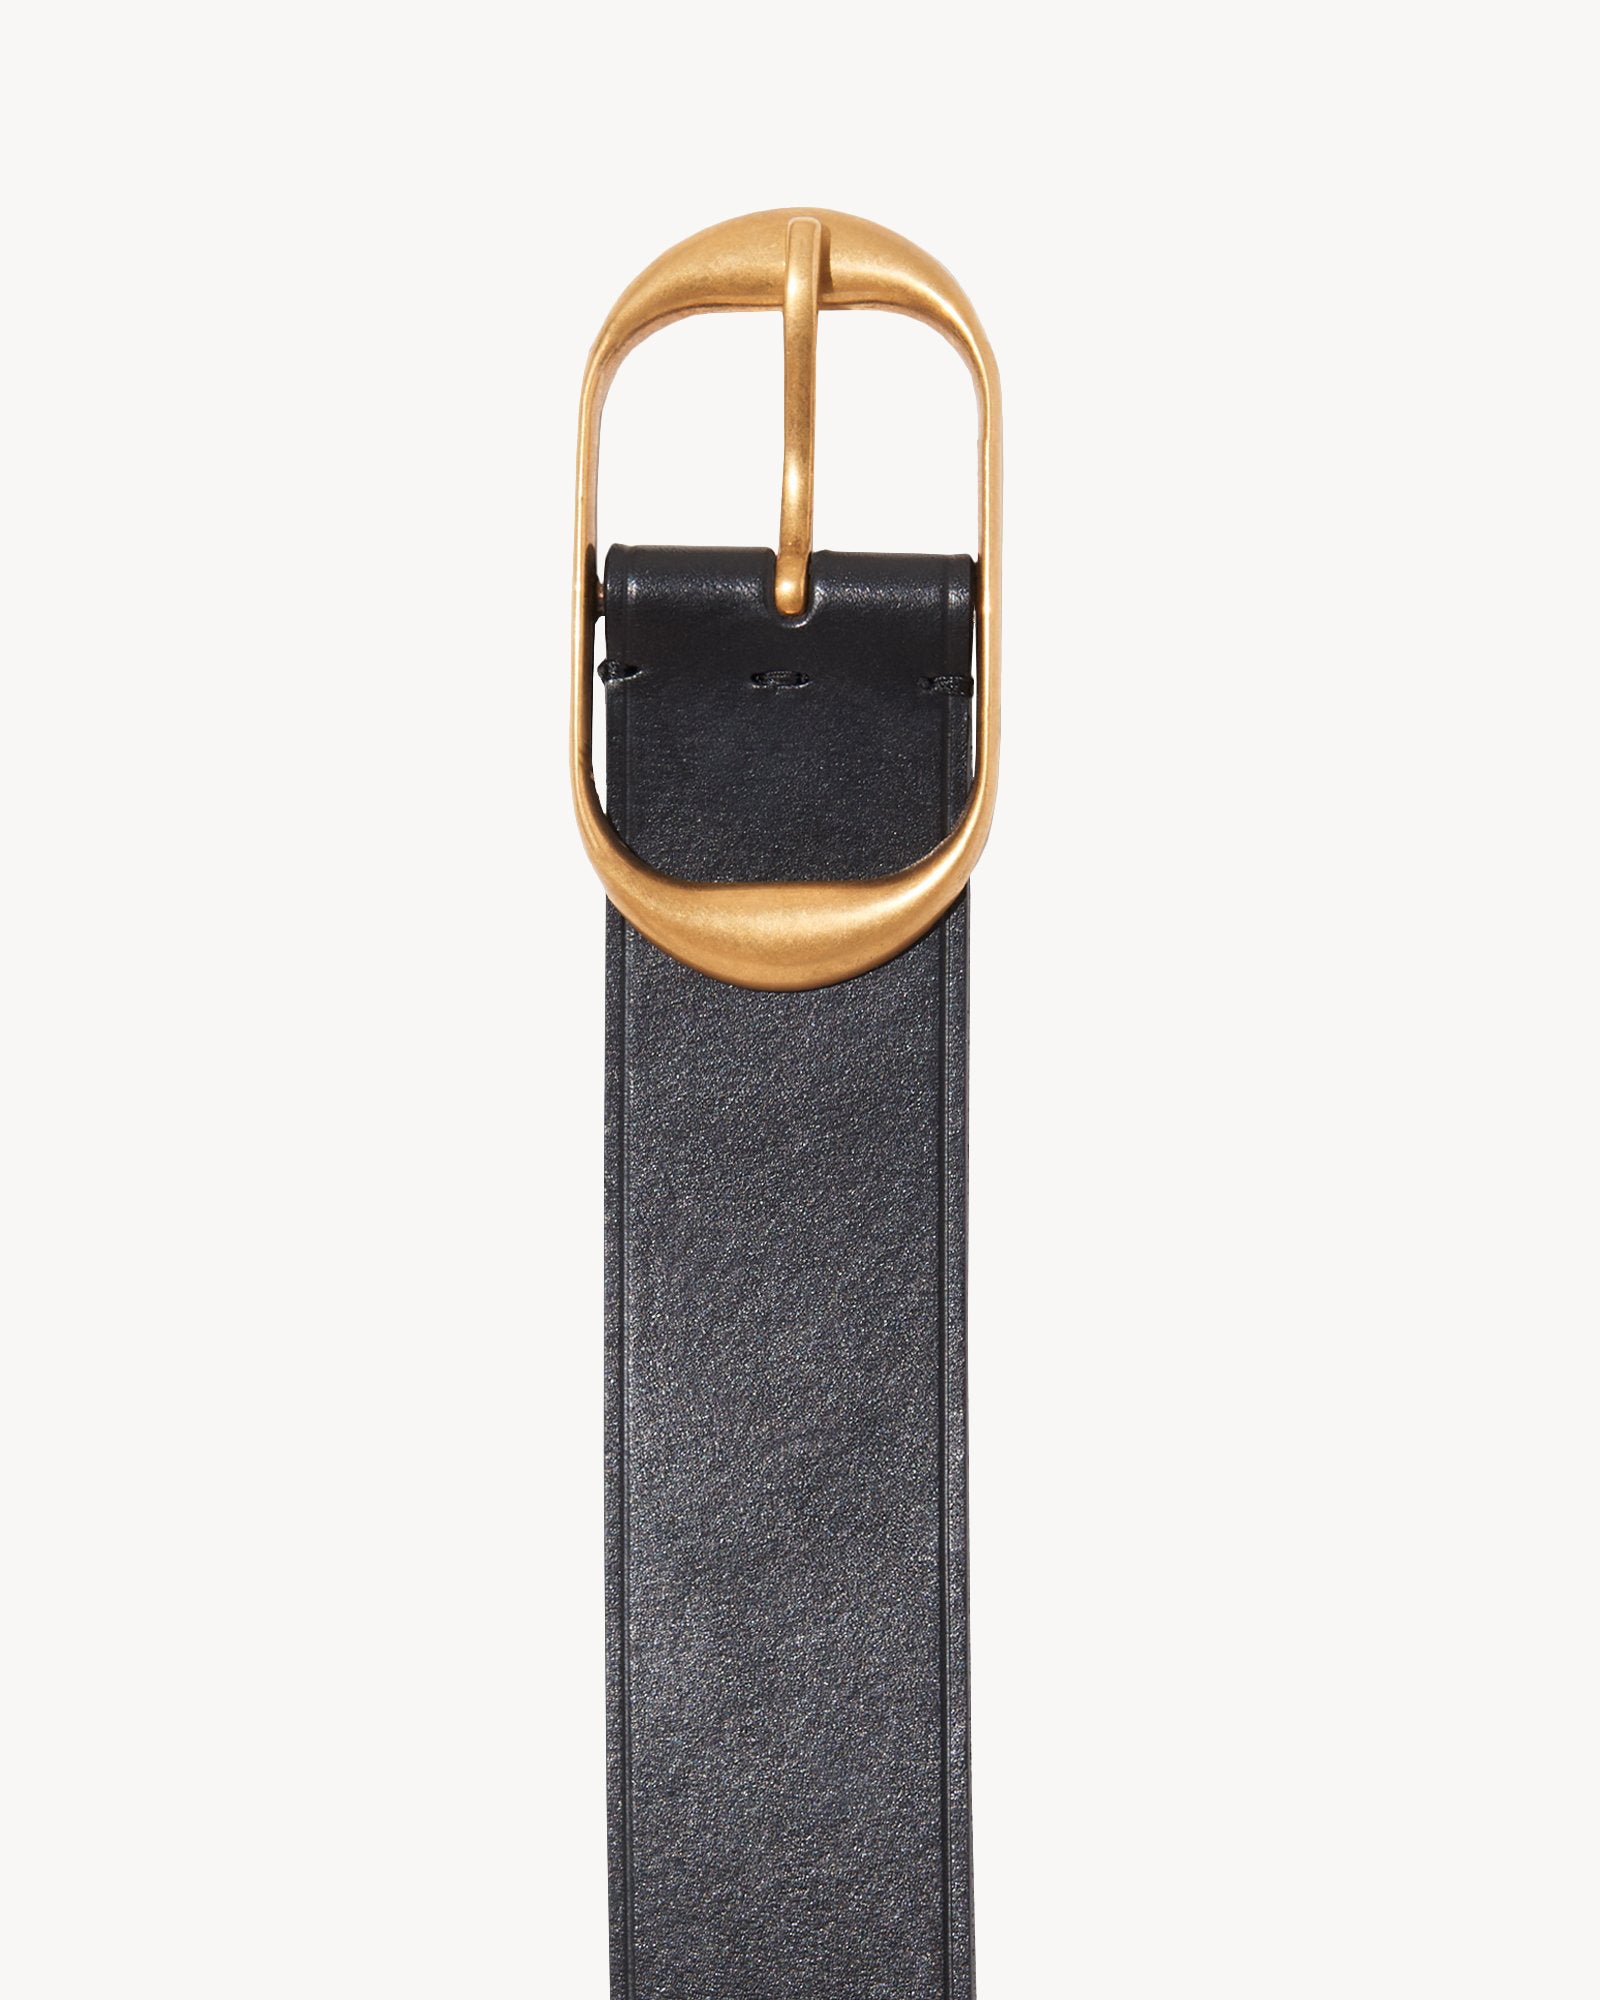 The Nili Lotan Nili Belt in Black W Antique Brass Buckle available at The New Trend Australia